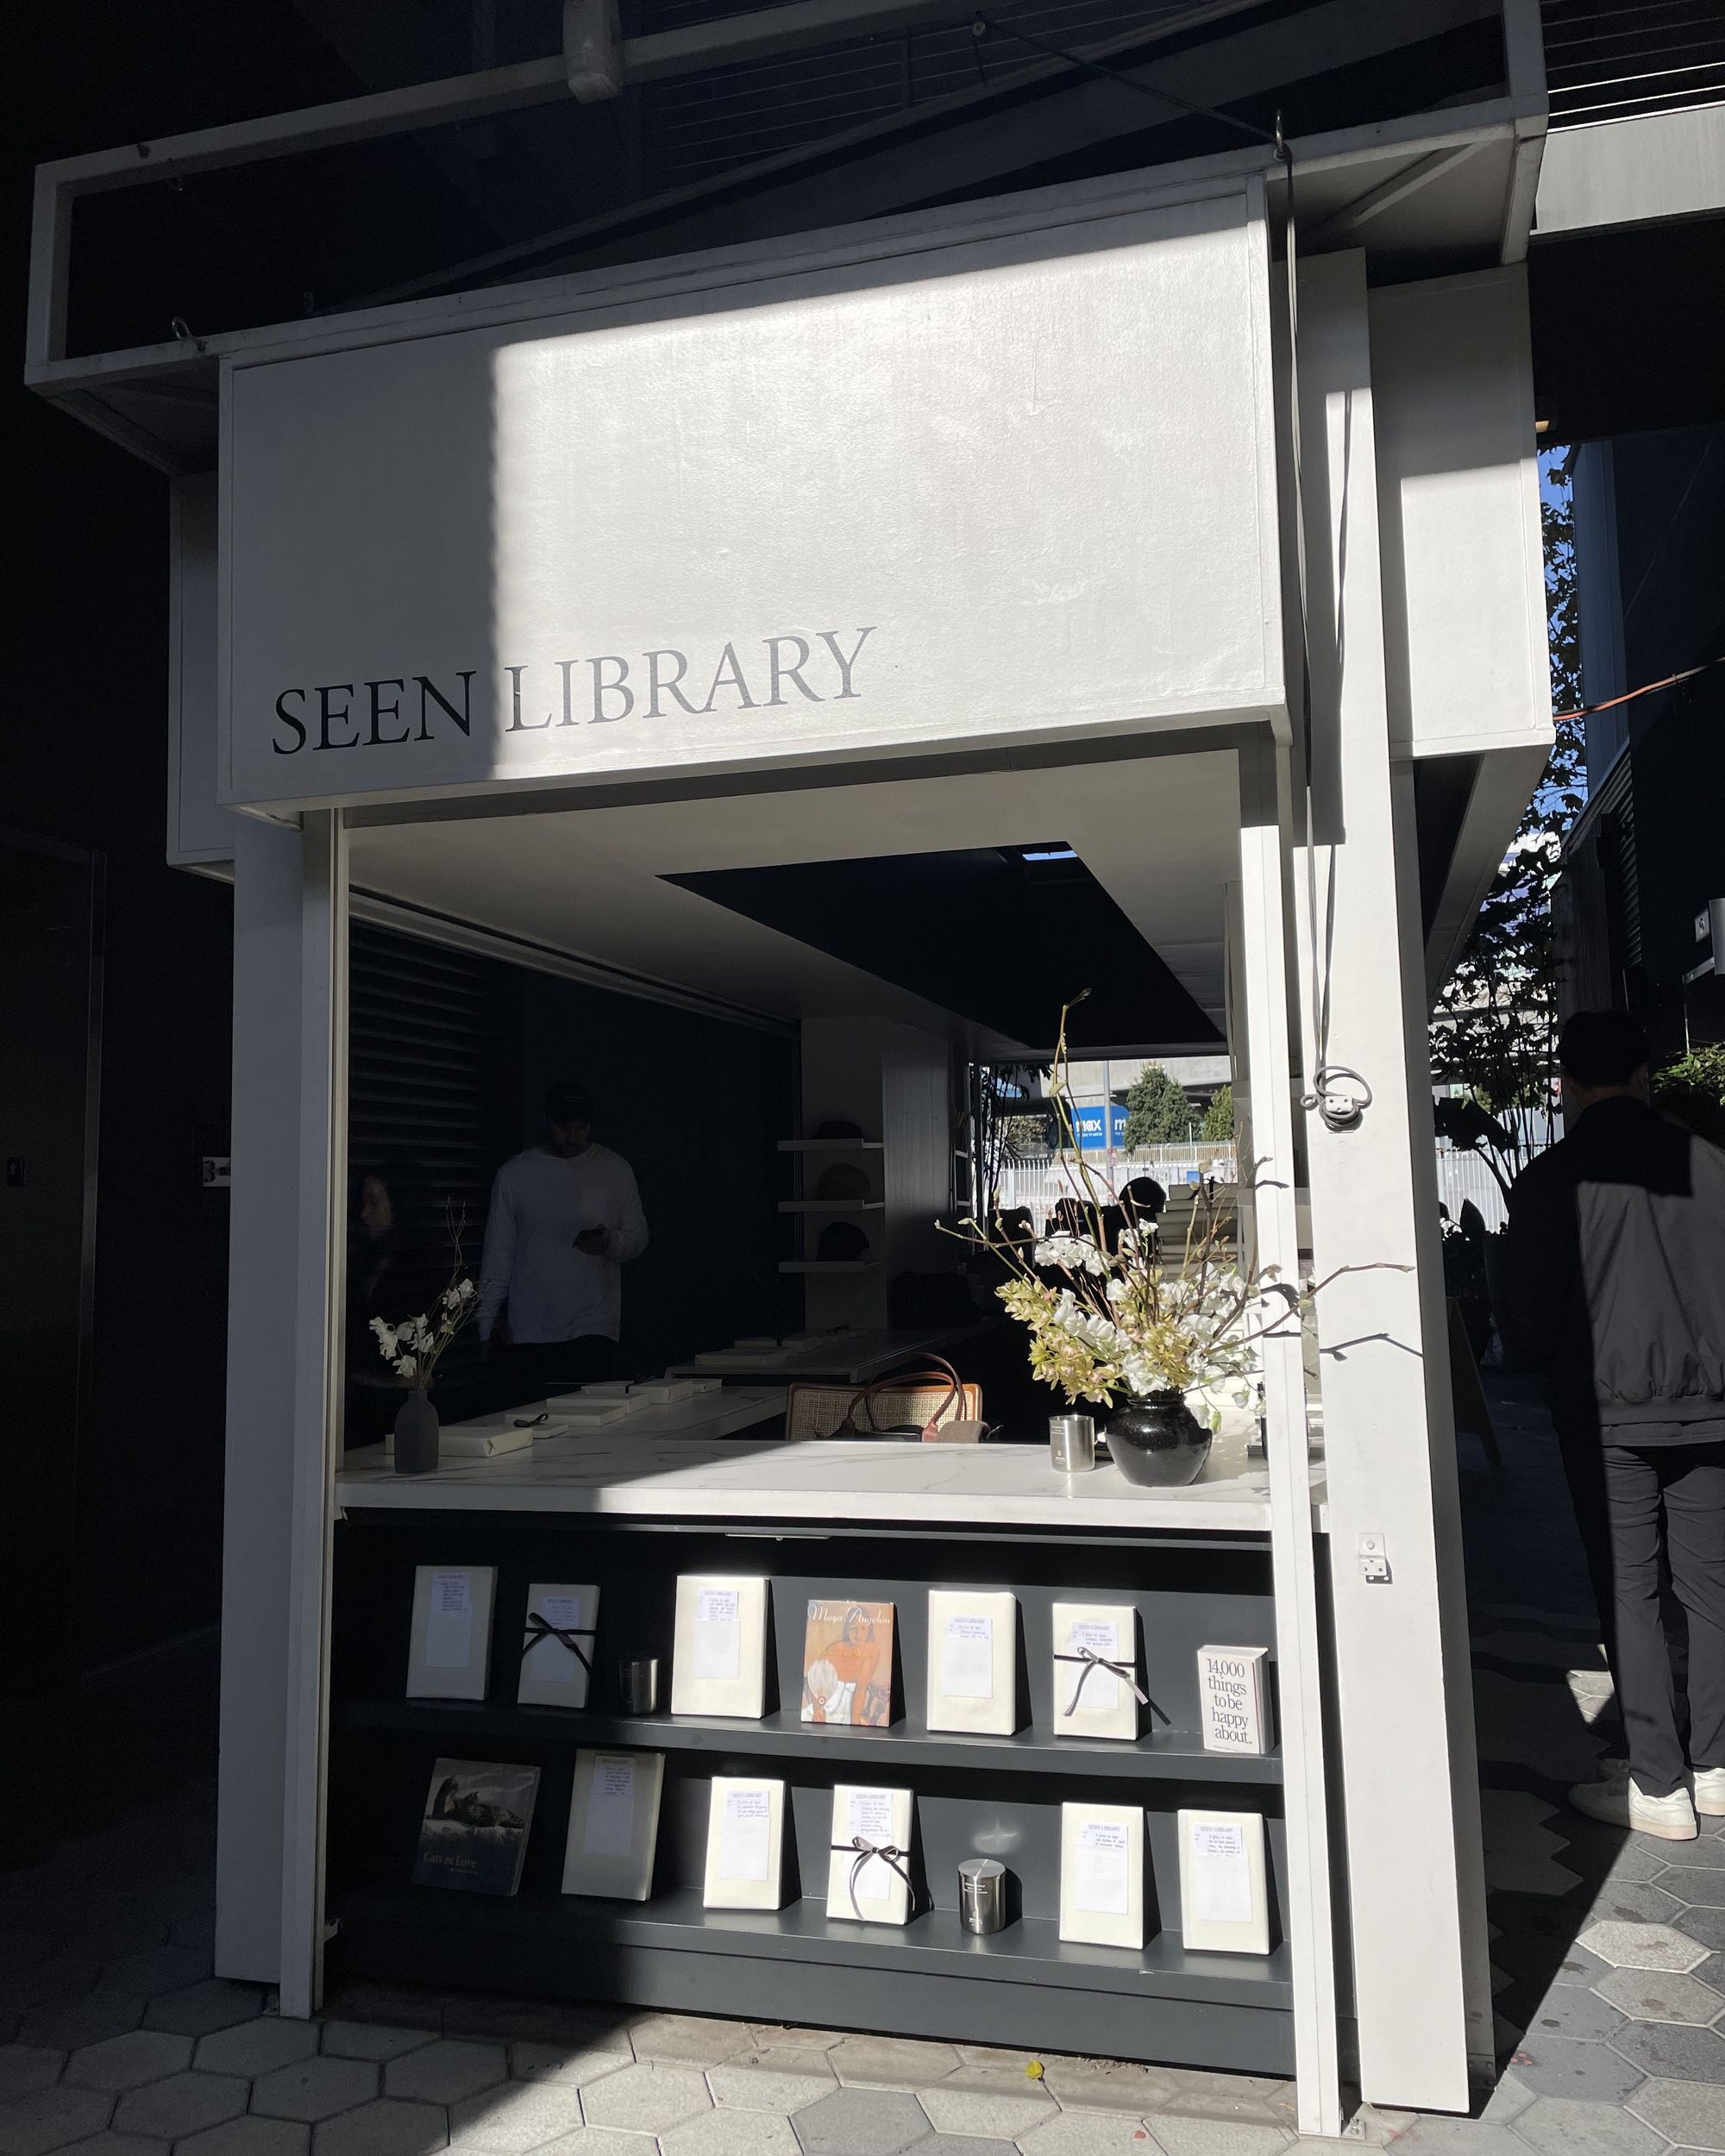 Seen Library x noissue